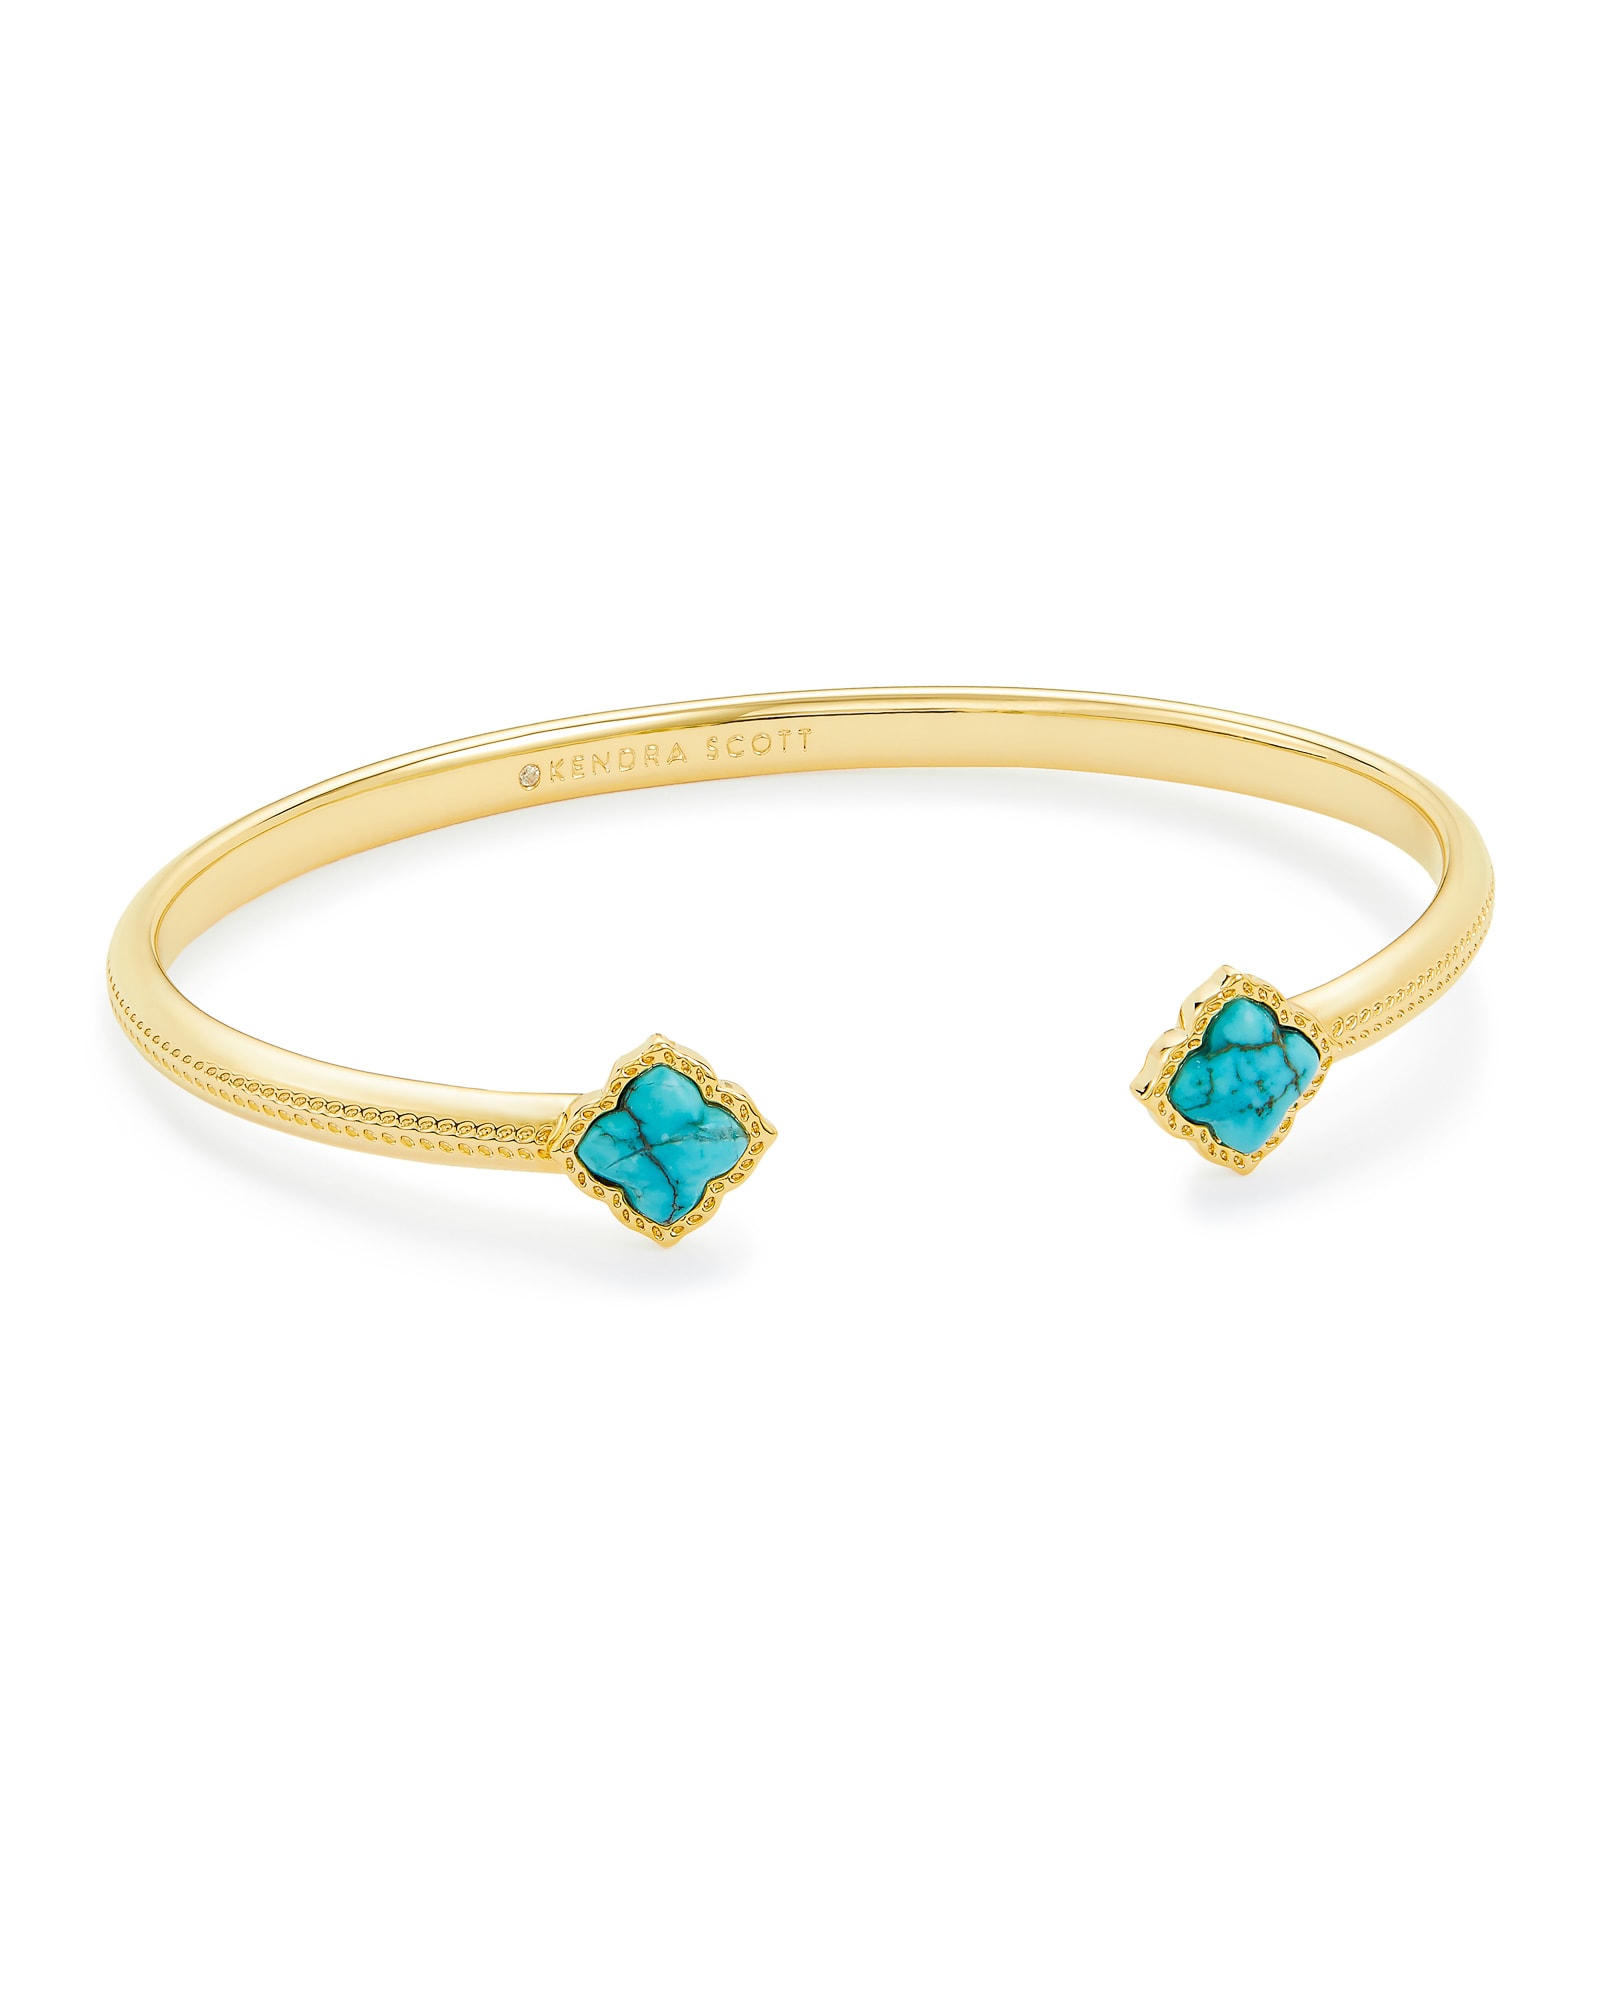 Mallory Gold Cuff Bracelet in Variegated Turquoise Magnesite